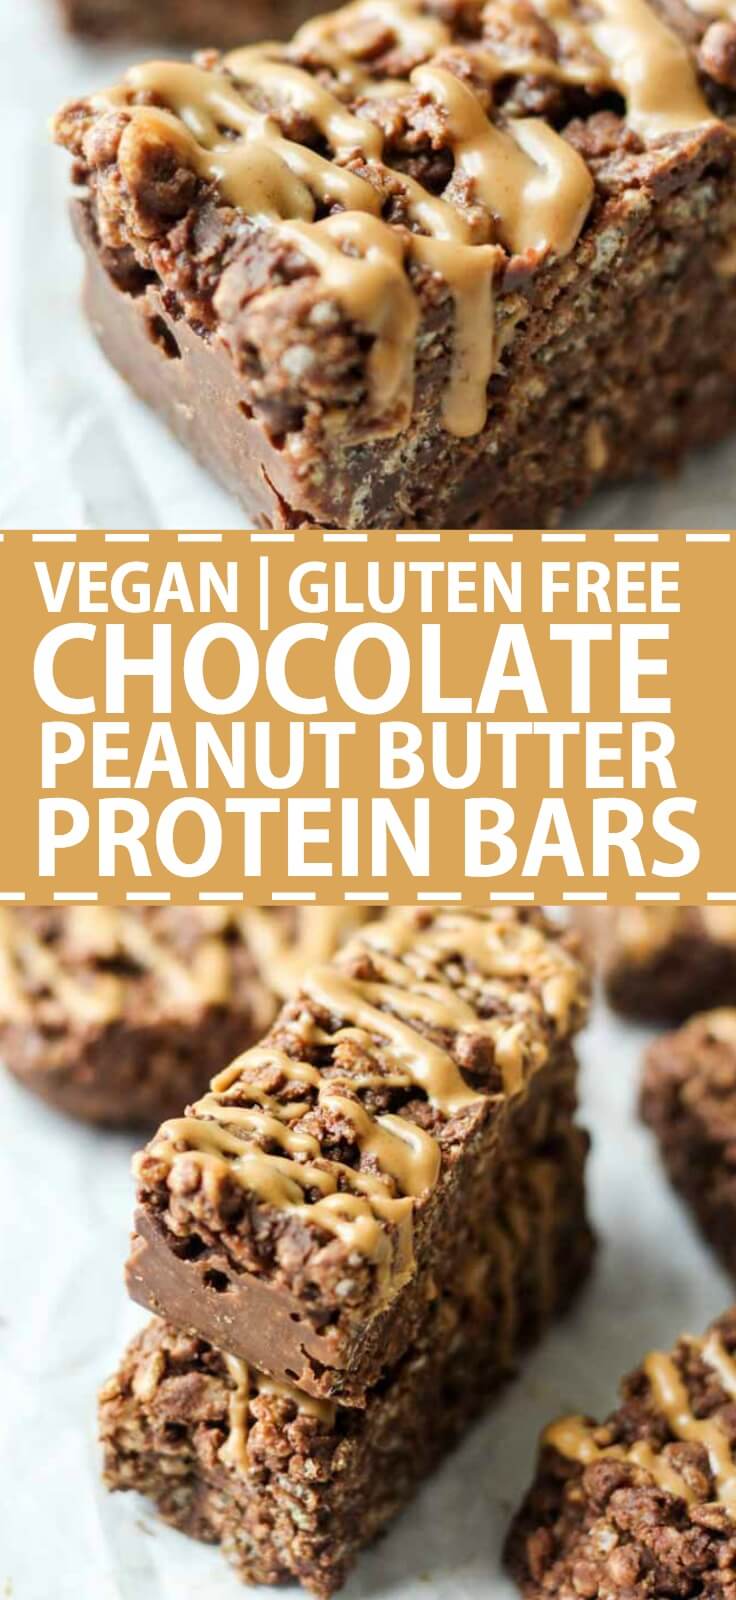 Crunchy, peanut-butter filled protein bars made with the new Kashi® GOLEAN™ Plant Powered Shakes are a sweet and perfect treat for breakfast, a snack, or pre/post workout meal. Plus they're gluten-free and vegan!